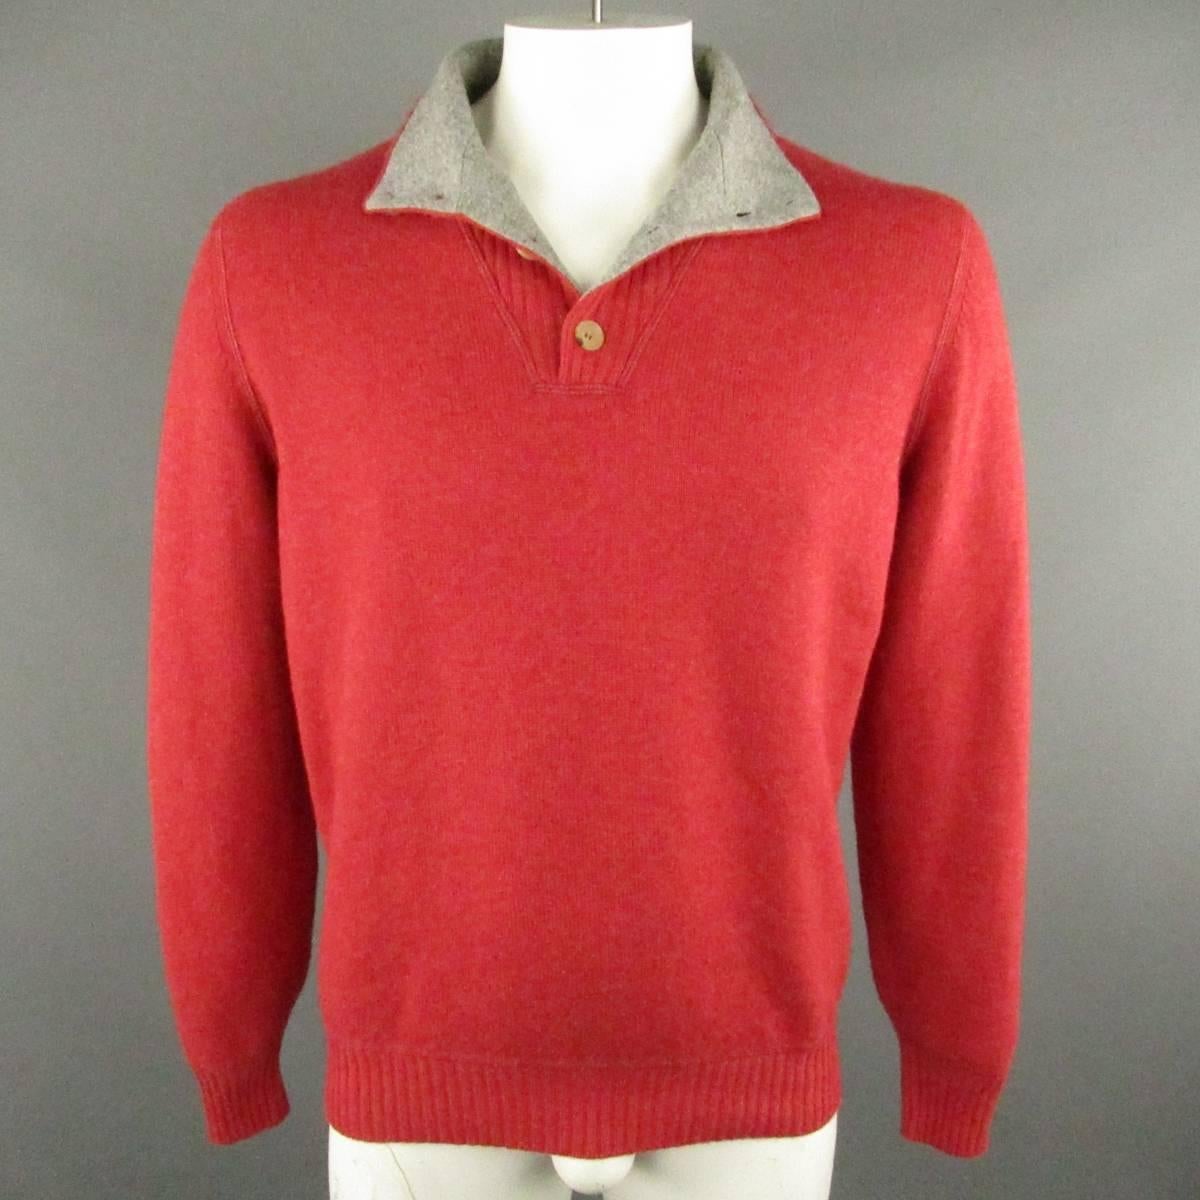 BRUNELLO CUCINELLI Sweater consists of cashmere material in a red color tone. Designed in a high-collar, button-up chest in rib pattern. Raglan shoulder detail with rib cuff and hem. Made in Italy.
 
Good Pre-Owned Condition 
Marked Size: 52
